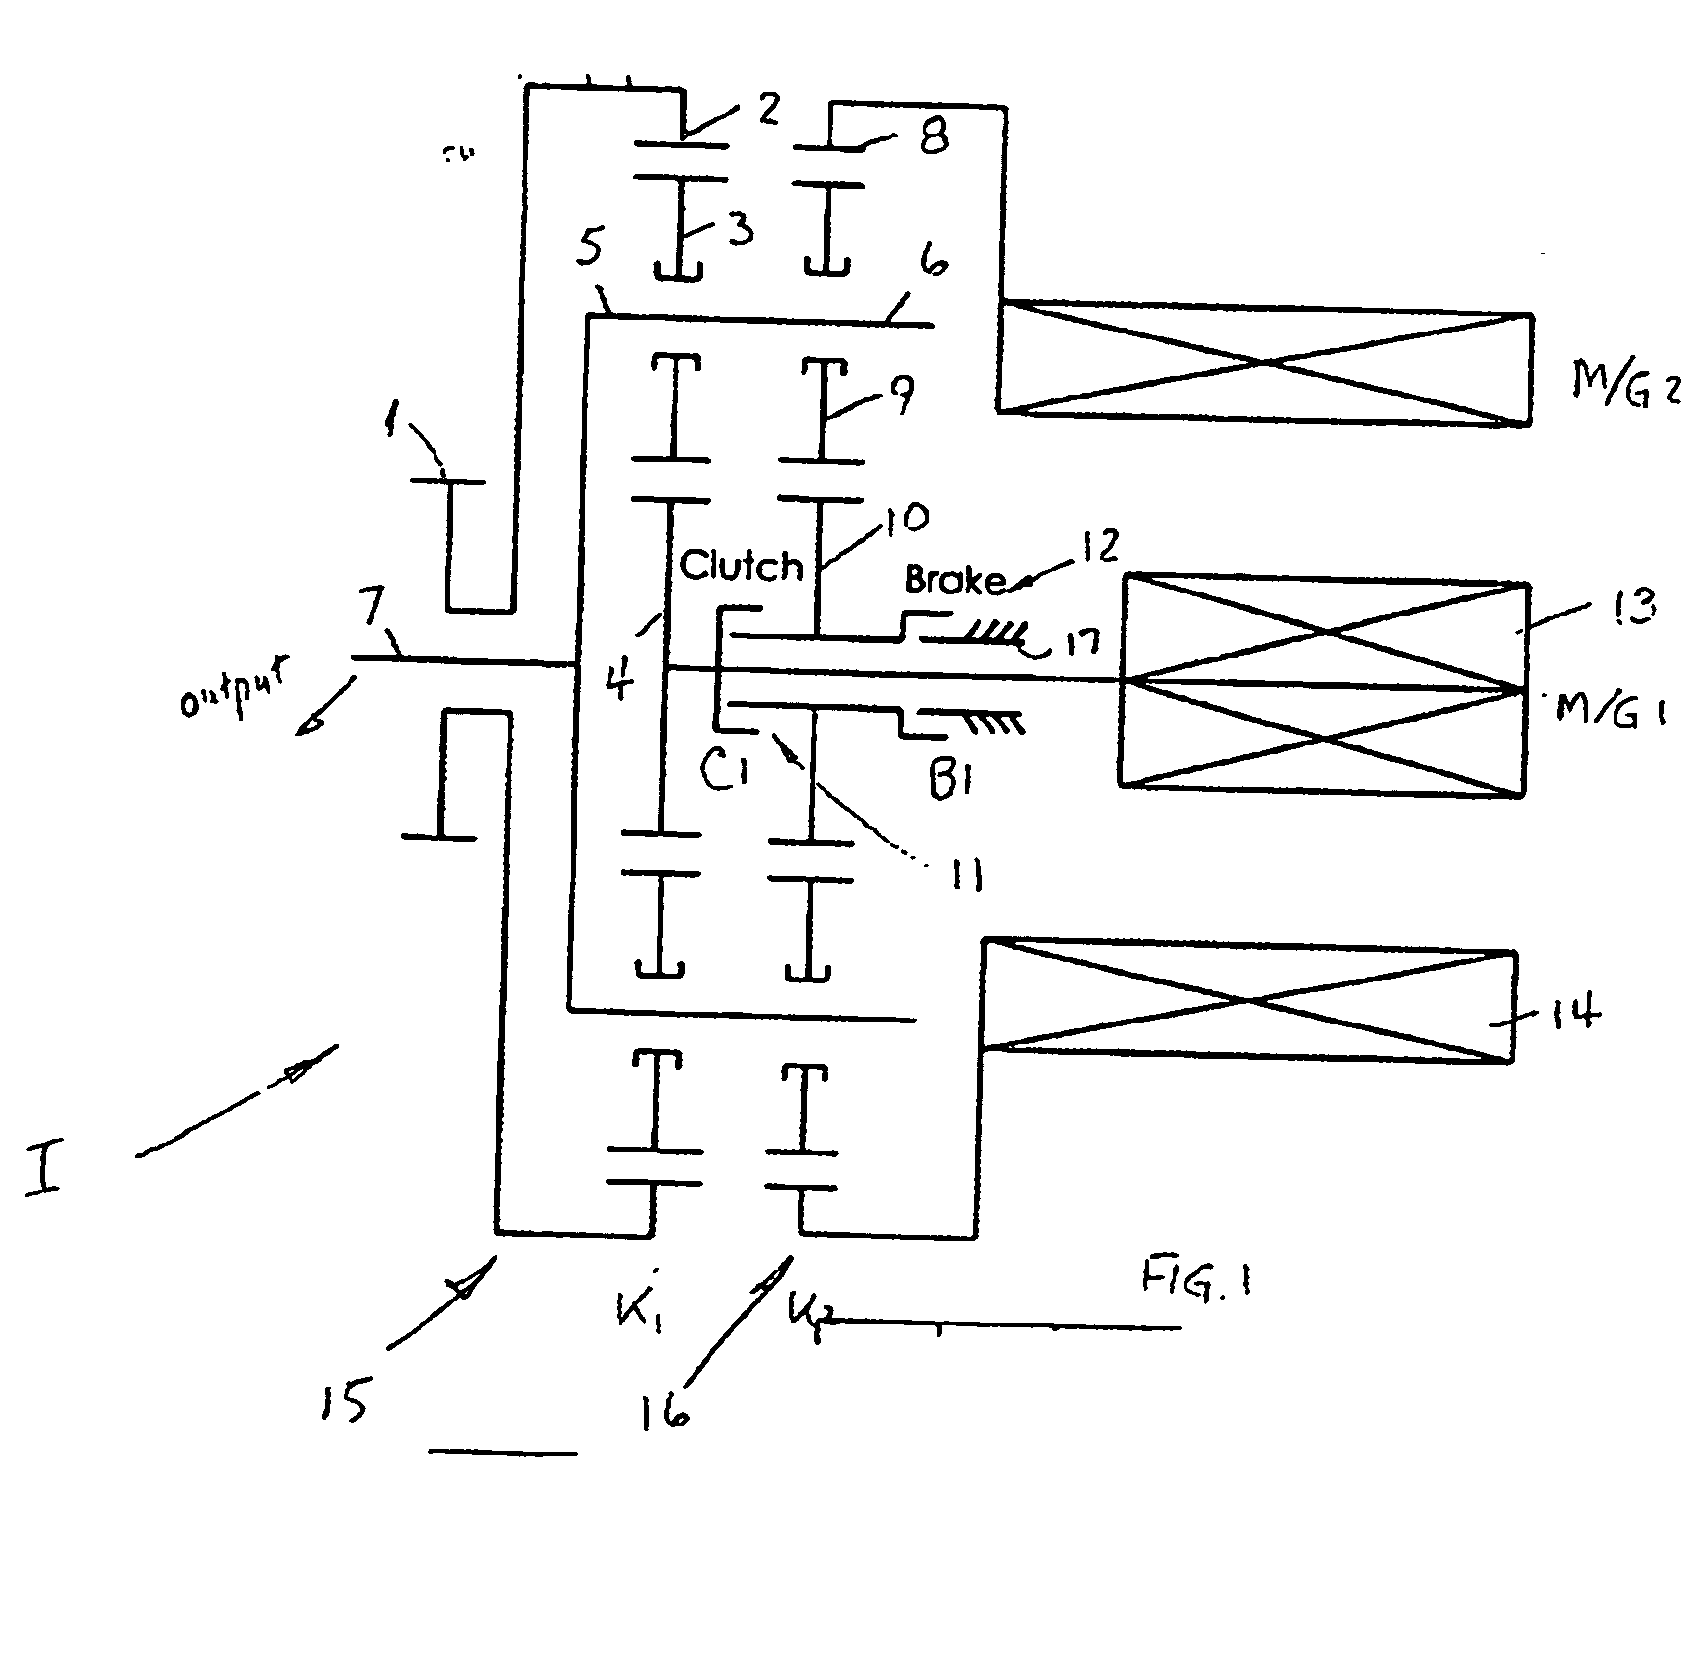 Method and apparatus for power flow management in electro-mechanical transmissions